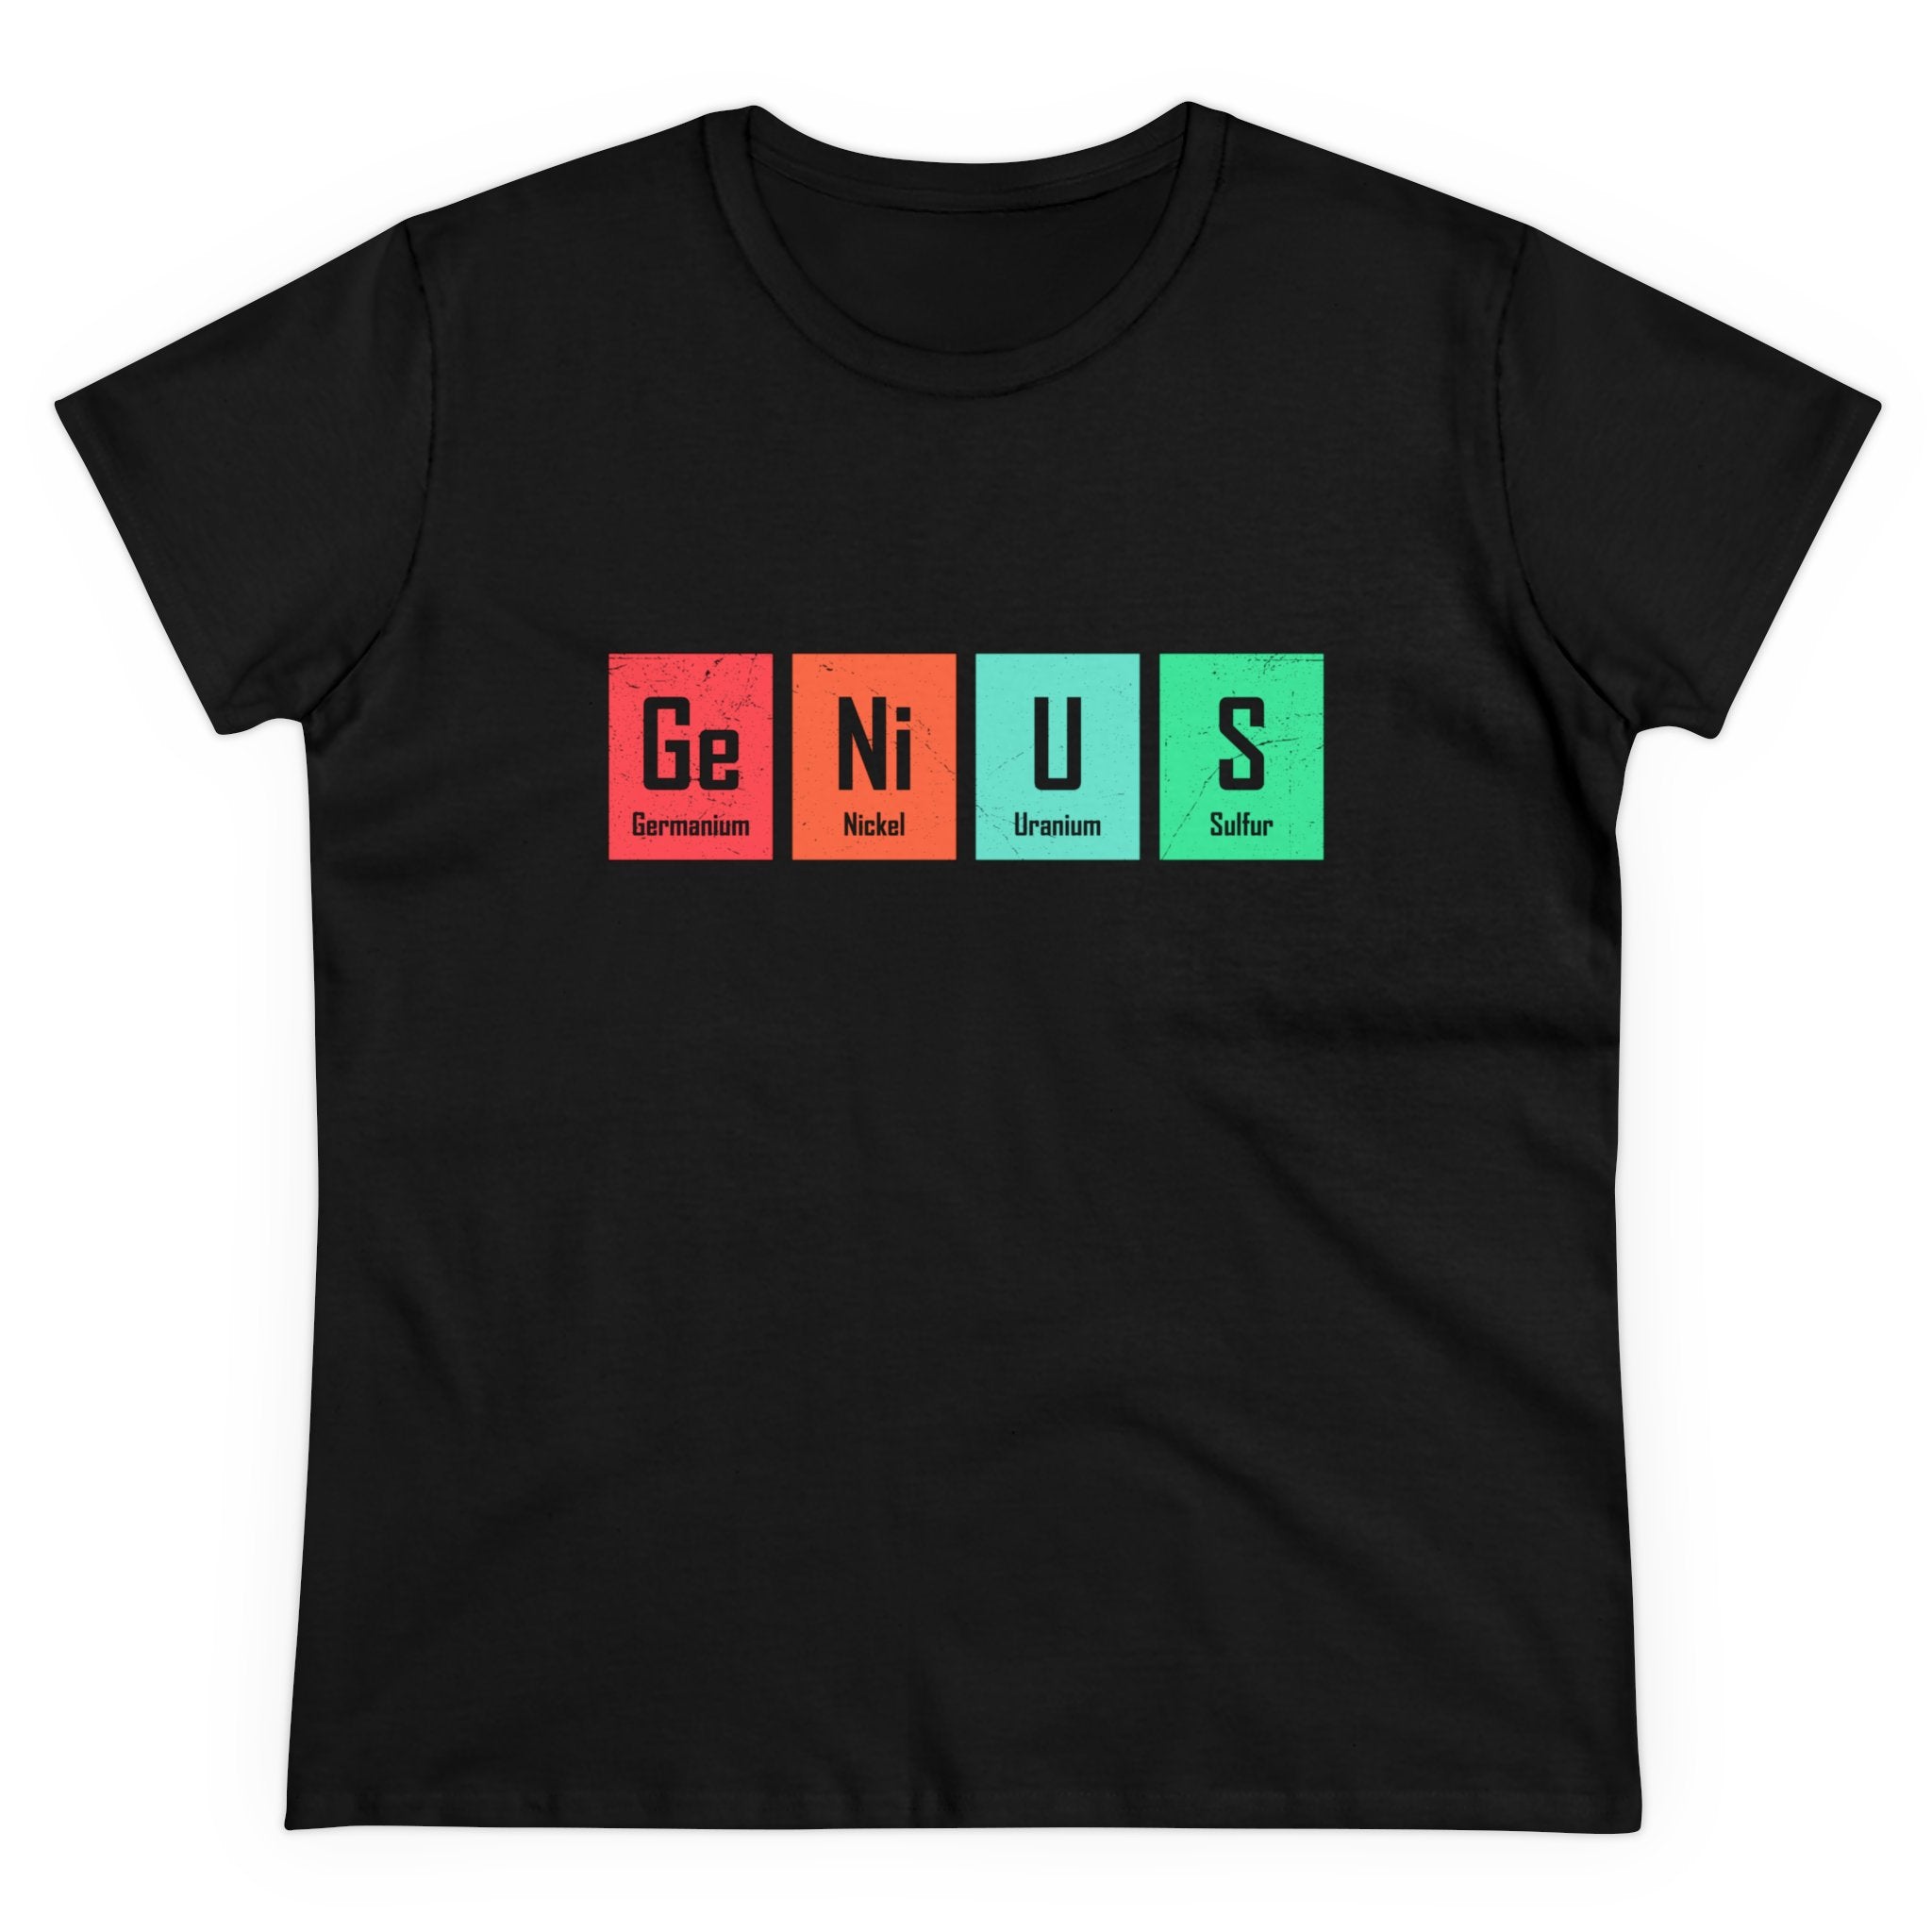 Cozy and stylish, this black Ge-Ni-U-S - Women's Tee features the word "Genius" spelled using elements from the periodic table: Germanium (Ge), Nickel (Ni), Uranium (U), and Sulfur (S). Crafted from soft cotton, it combines comfort with a touch of scientific flair.